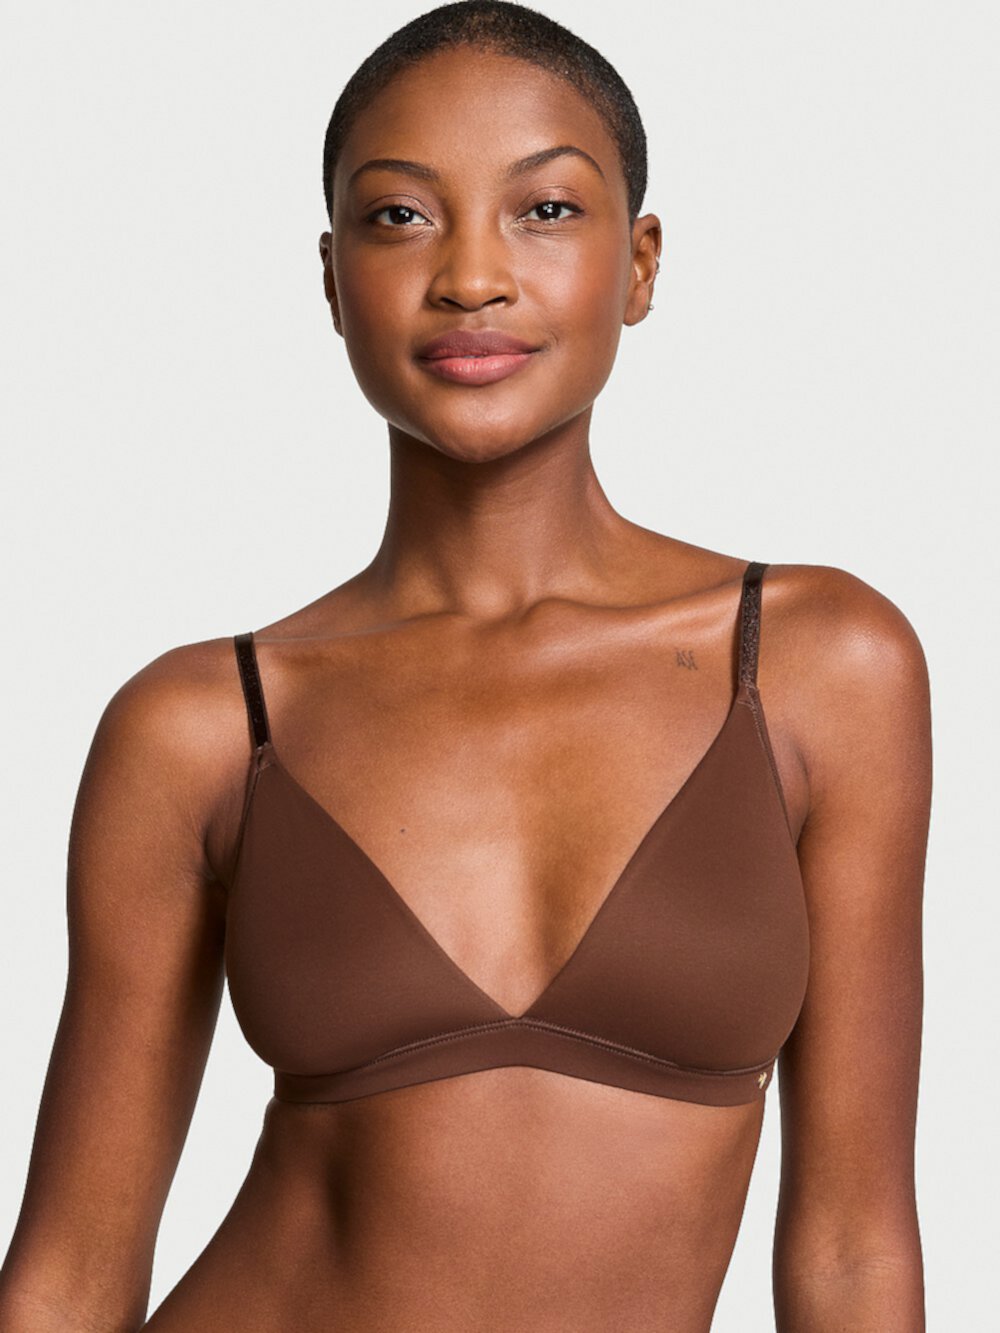 Smooth Triangle Bralette Dream Angels